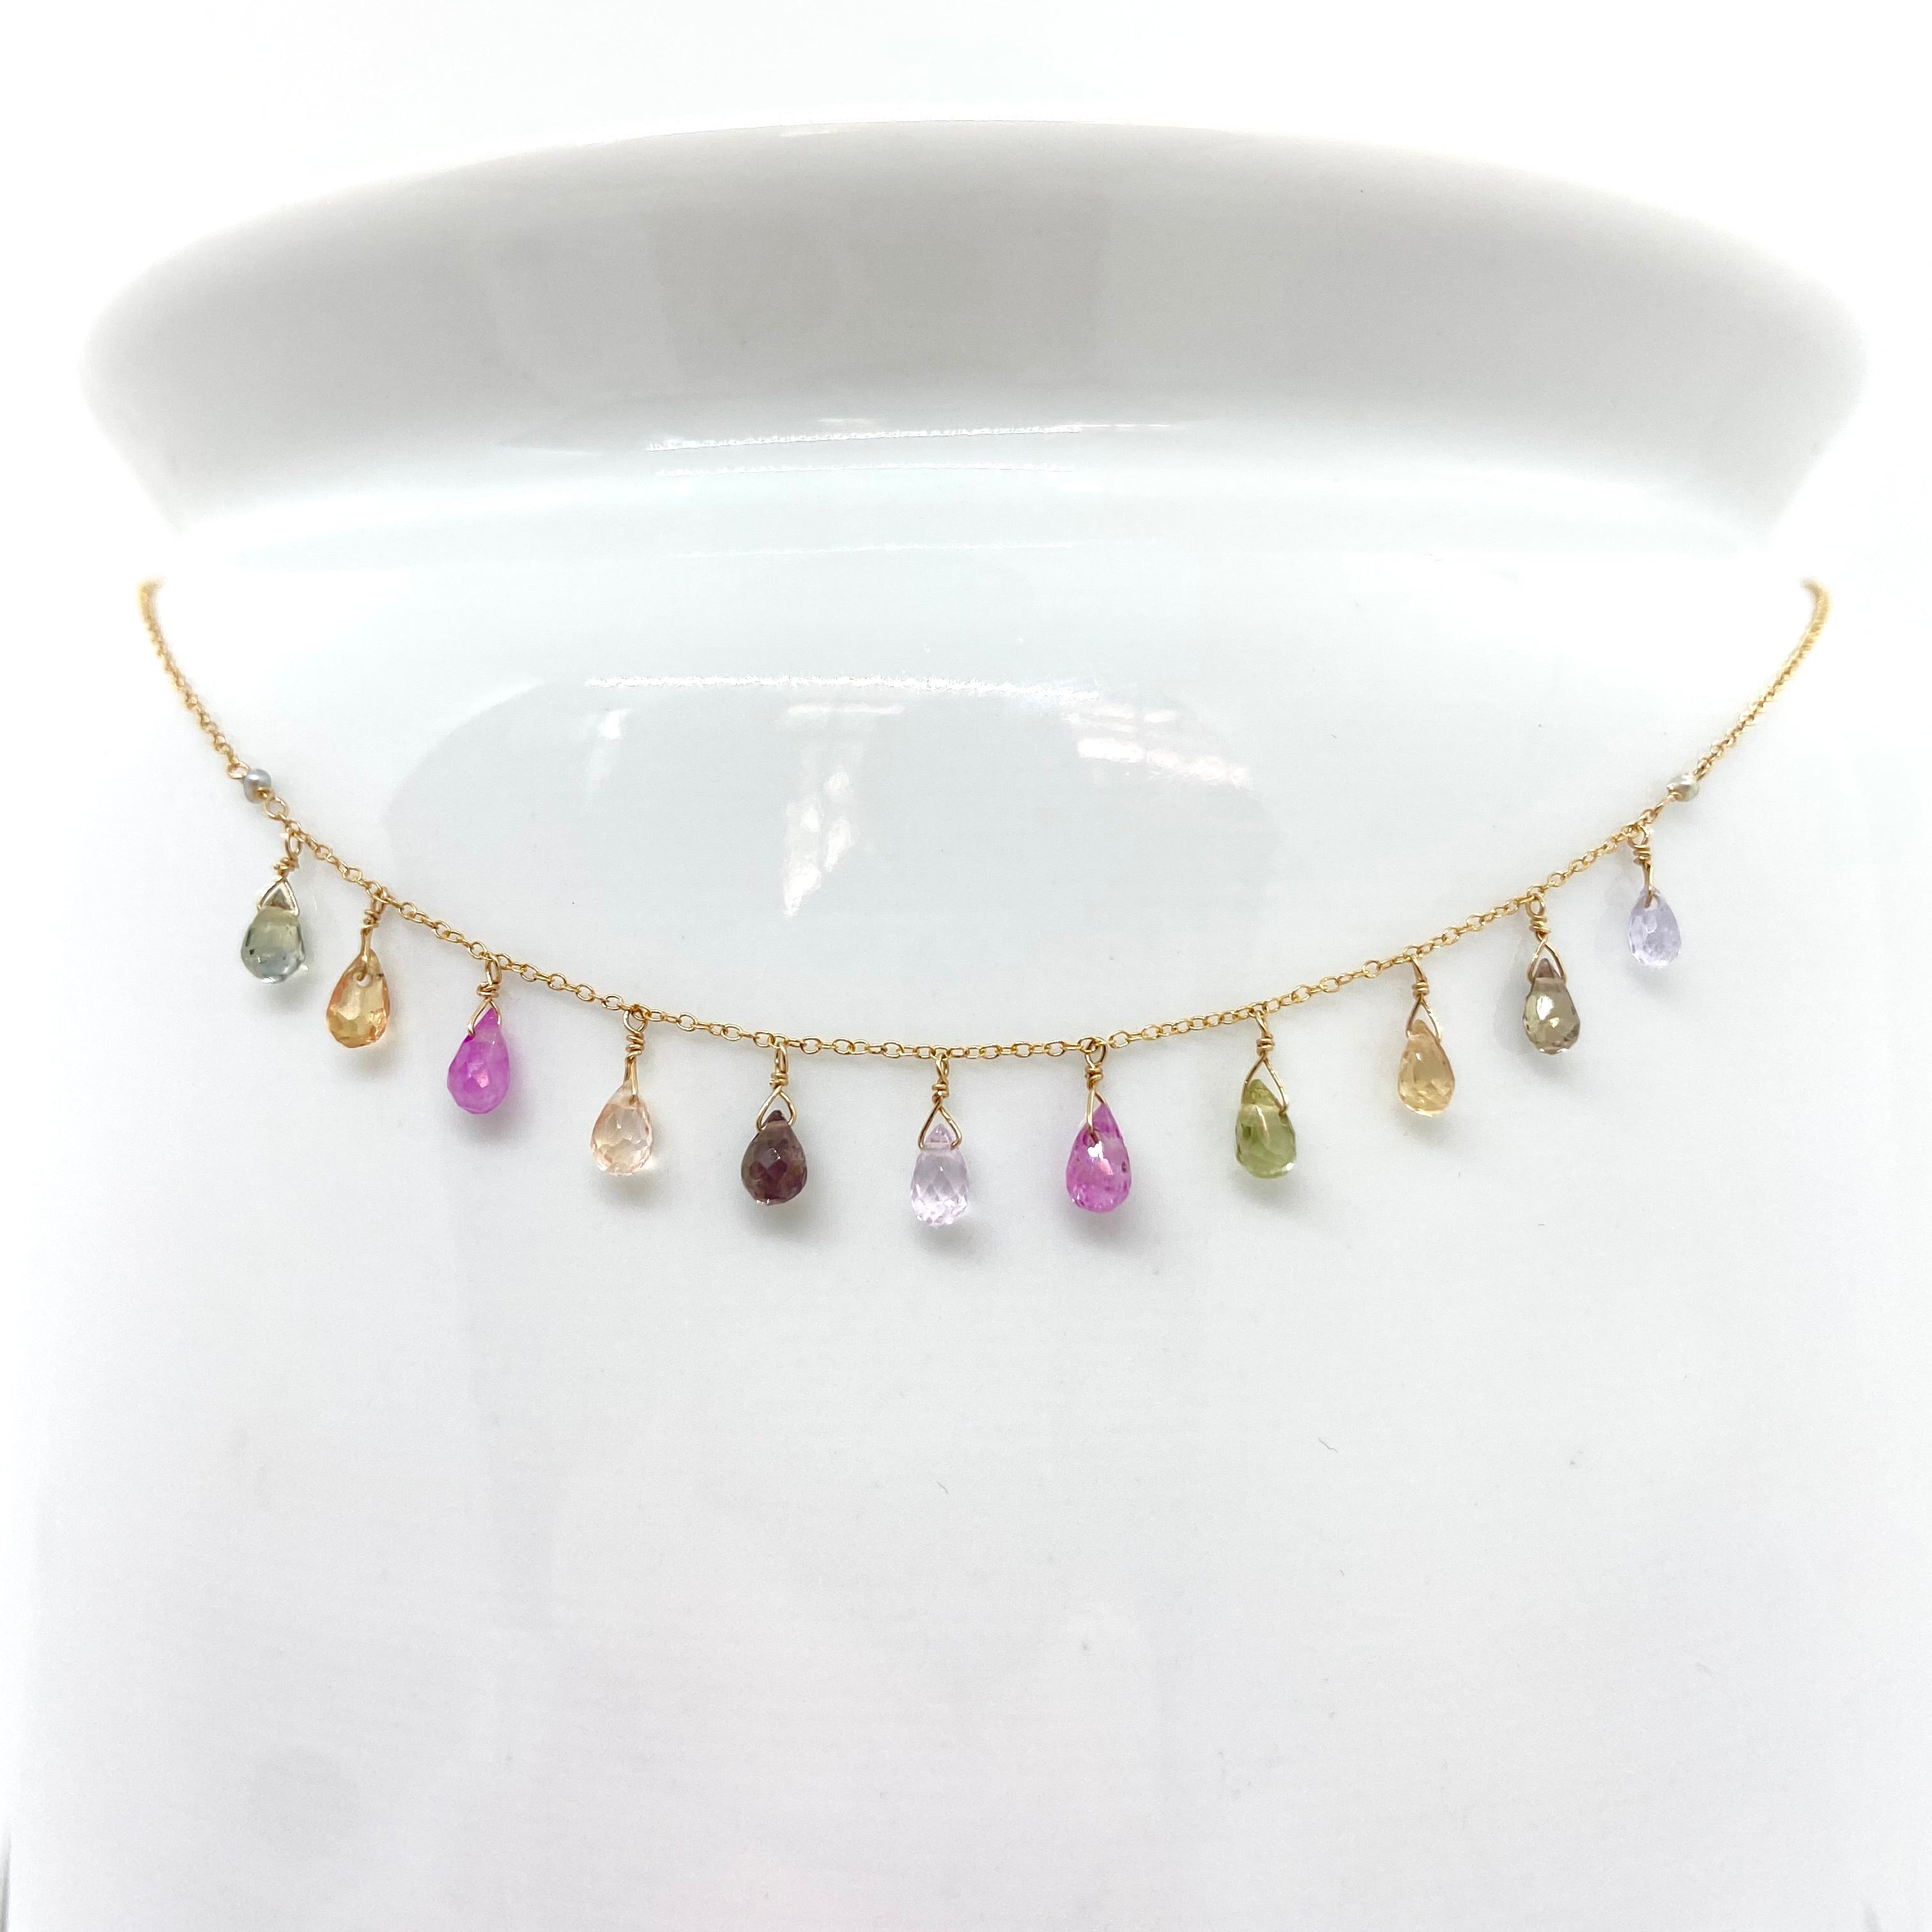 14k Gold Chain Necklace w/ Sapphires & Freshwater Pearls